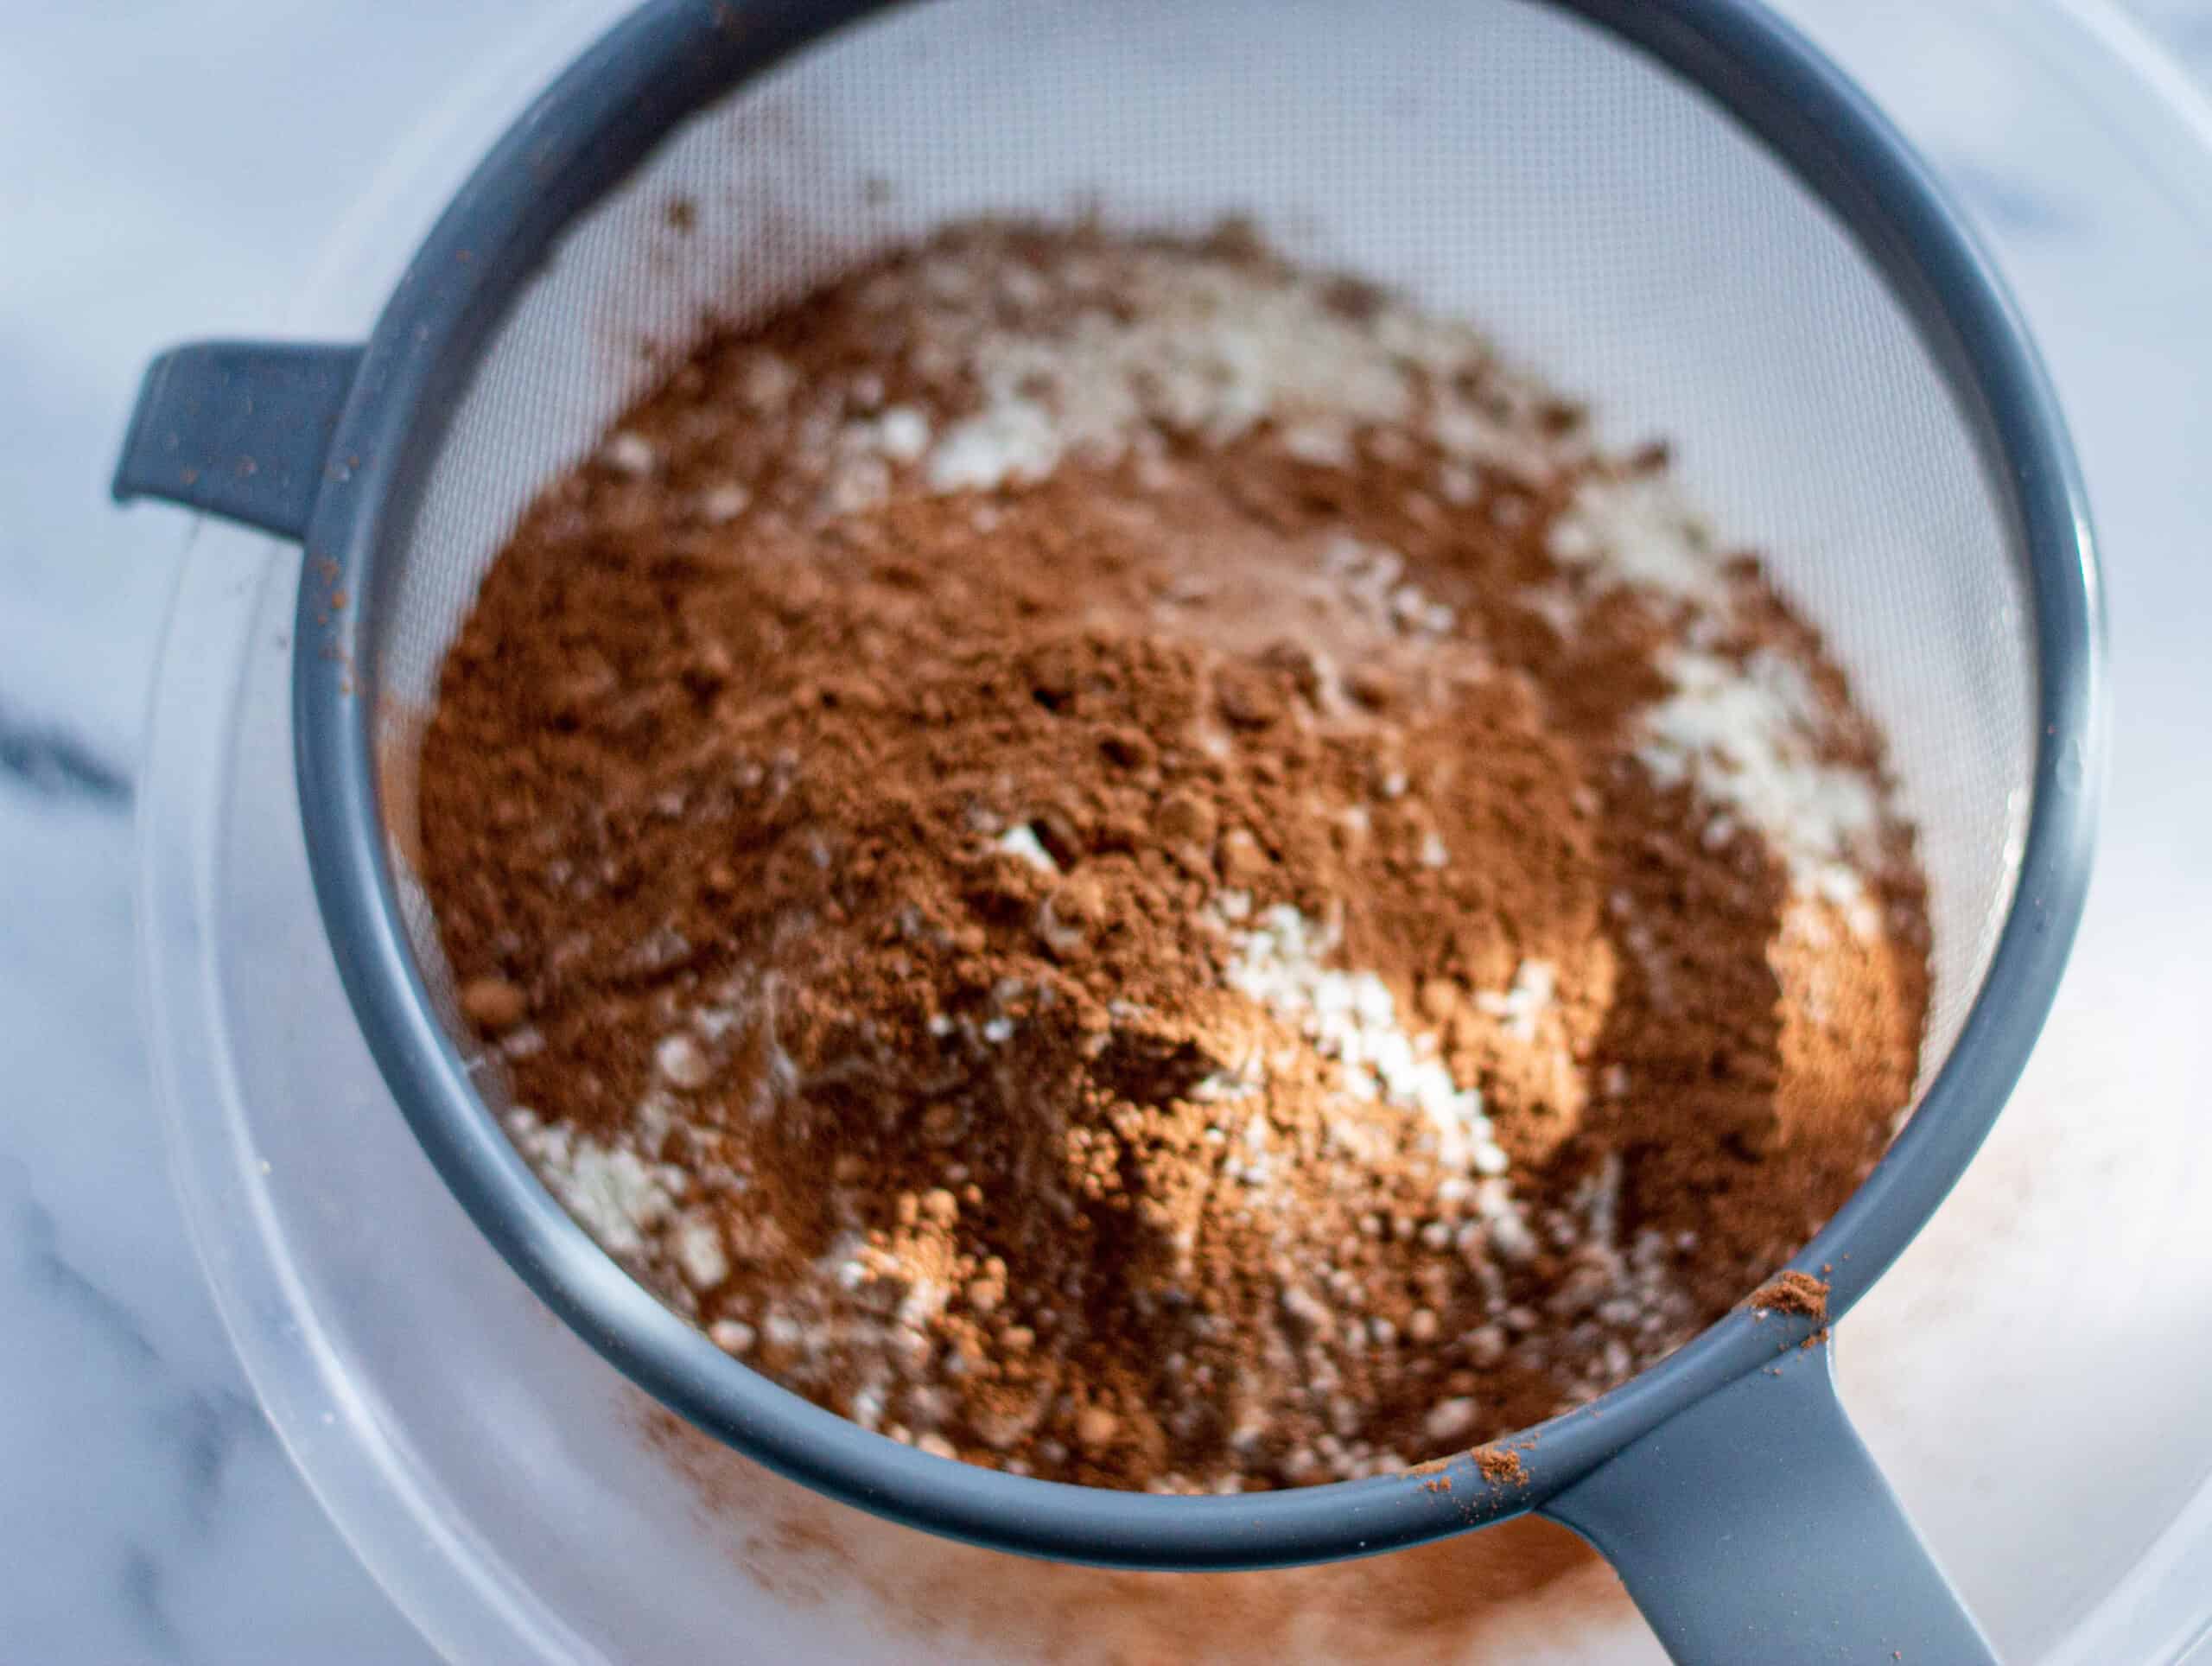 Sifting Cocoa Powder and Flour into a large bowl